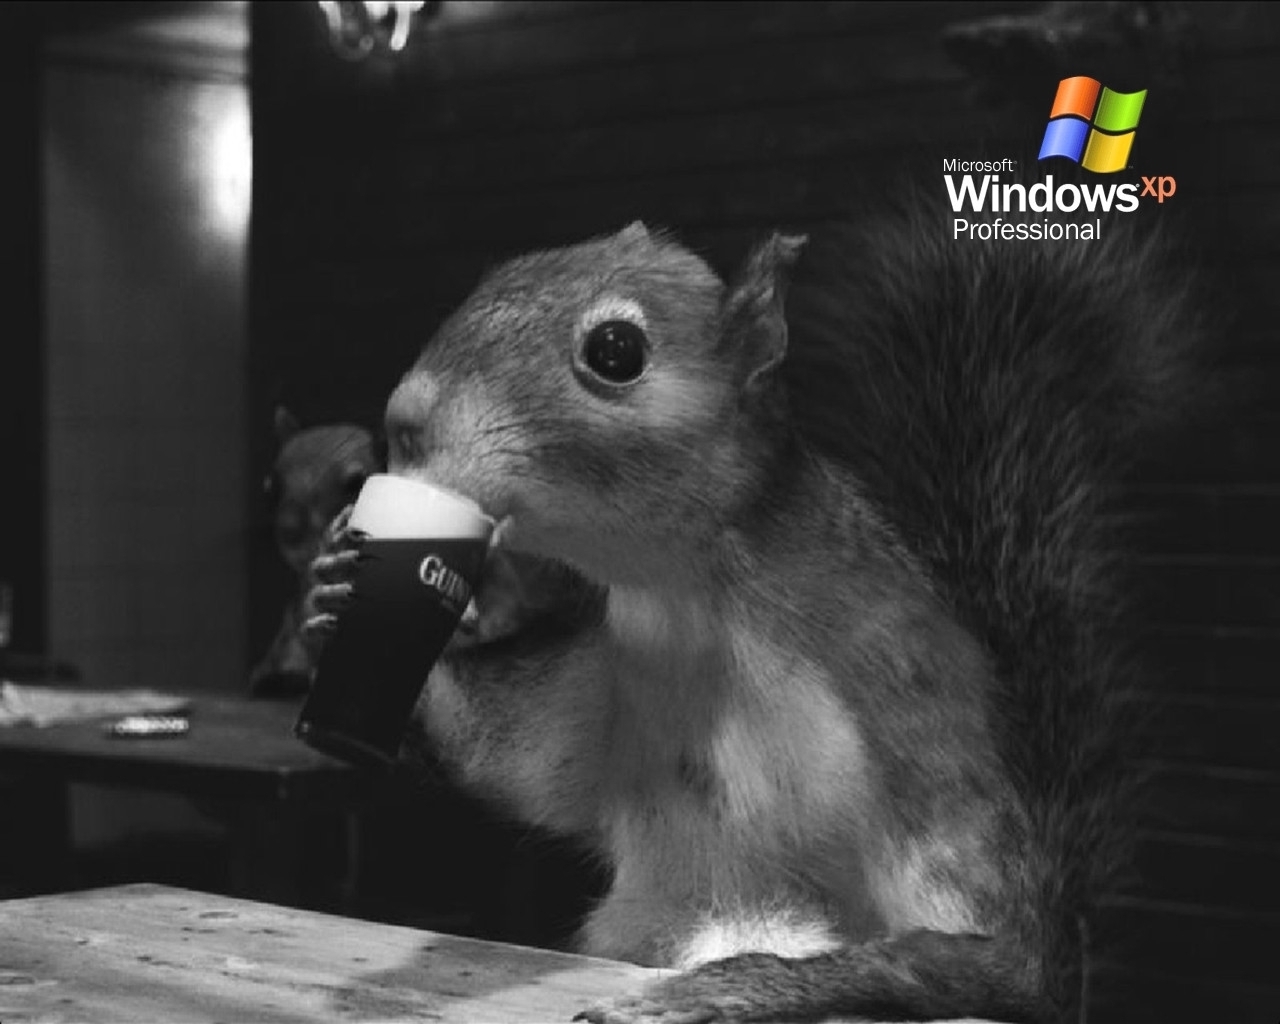 beer, funny, animals, squirrel, rodents, gray Full HD